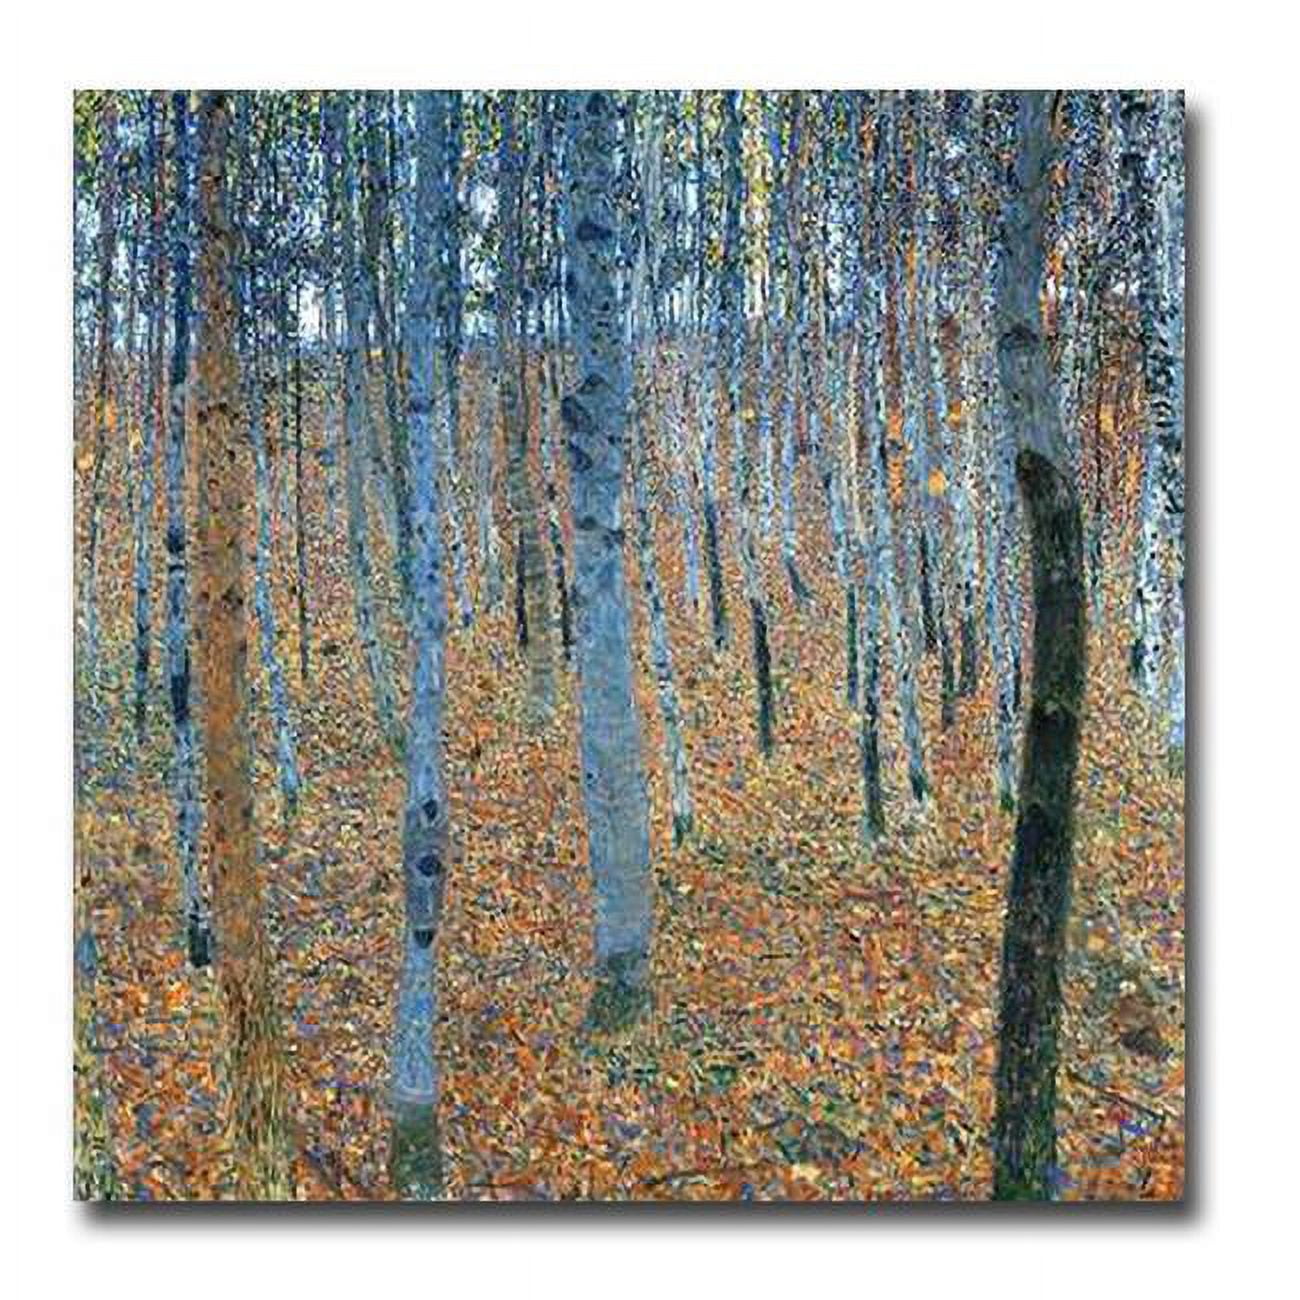 PerfectPillows Beech Grove I by Gustav Klimt Premium Gallery-Wrapped Canvas Giclee Art - Ready-to-Hang, 30 x 30 x 1.5 in.